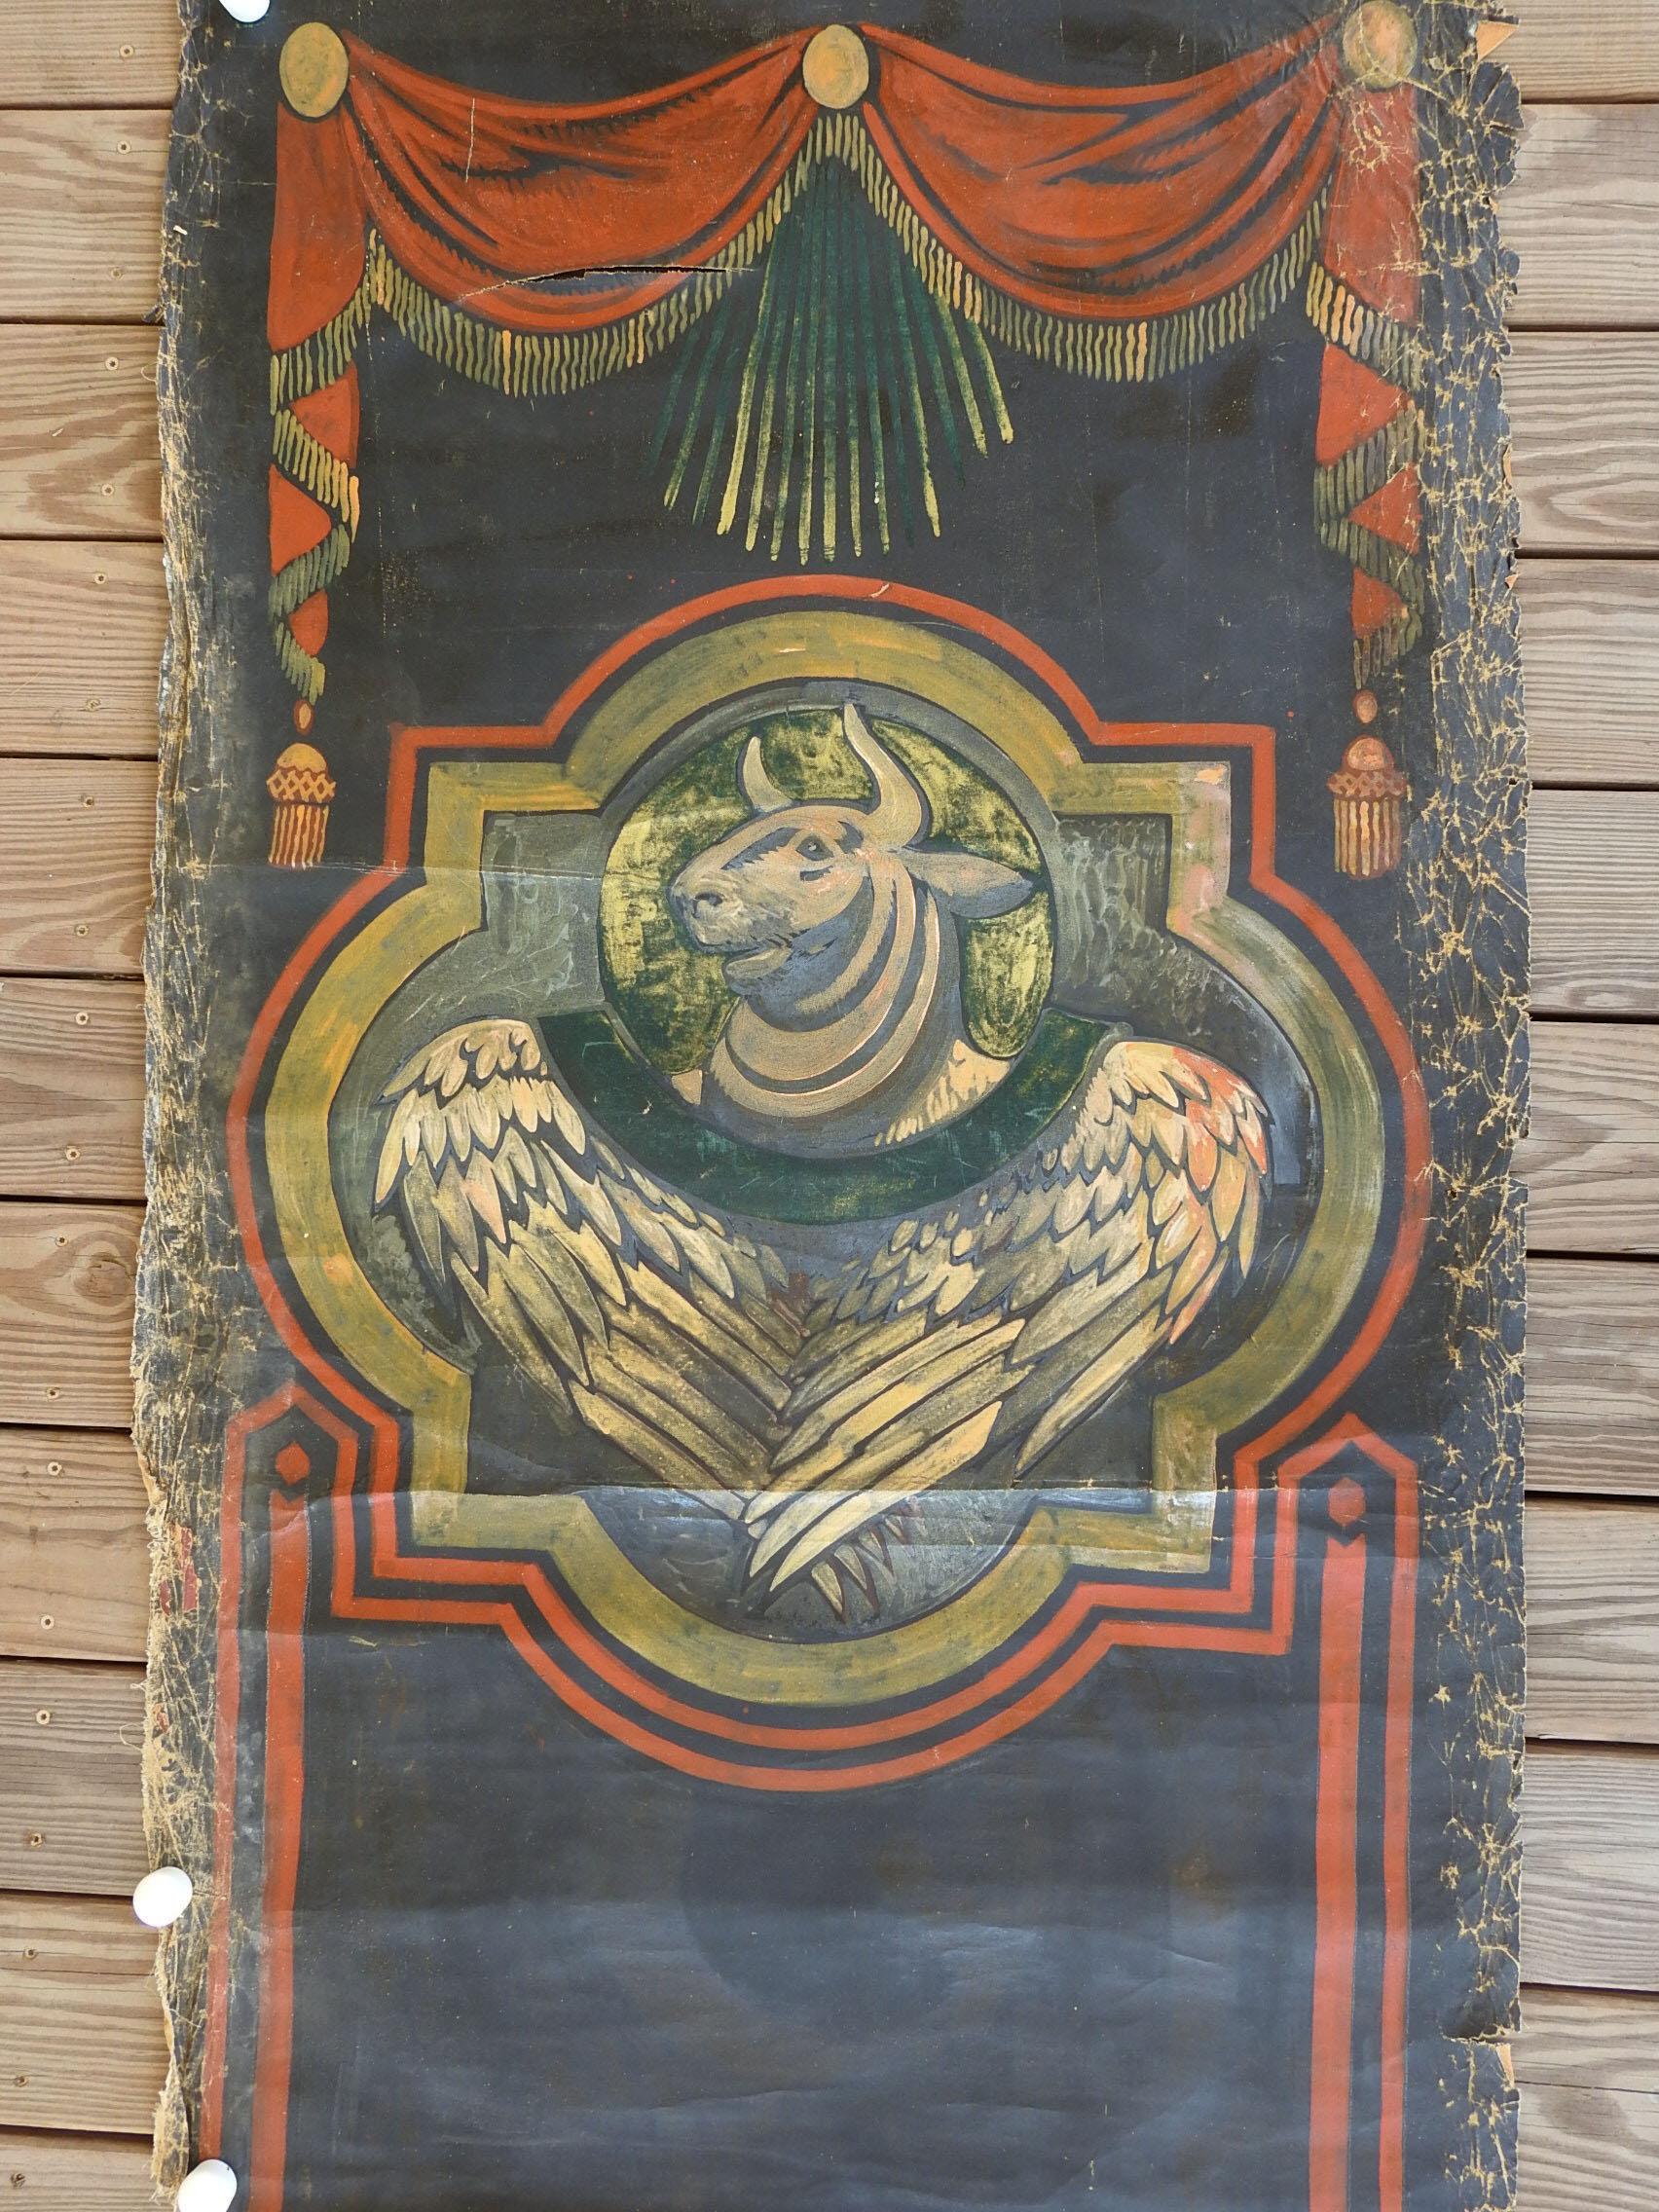 Vintage oil on canvas painting of the winged ox or bull of St. Luke by Geneva Flores Hart Fell (1906 - 2008) Texas. Black, dark terracotta and gold ox set inside quadrefoil with swags at top on flat canvas, likely for interior cathedral wall